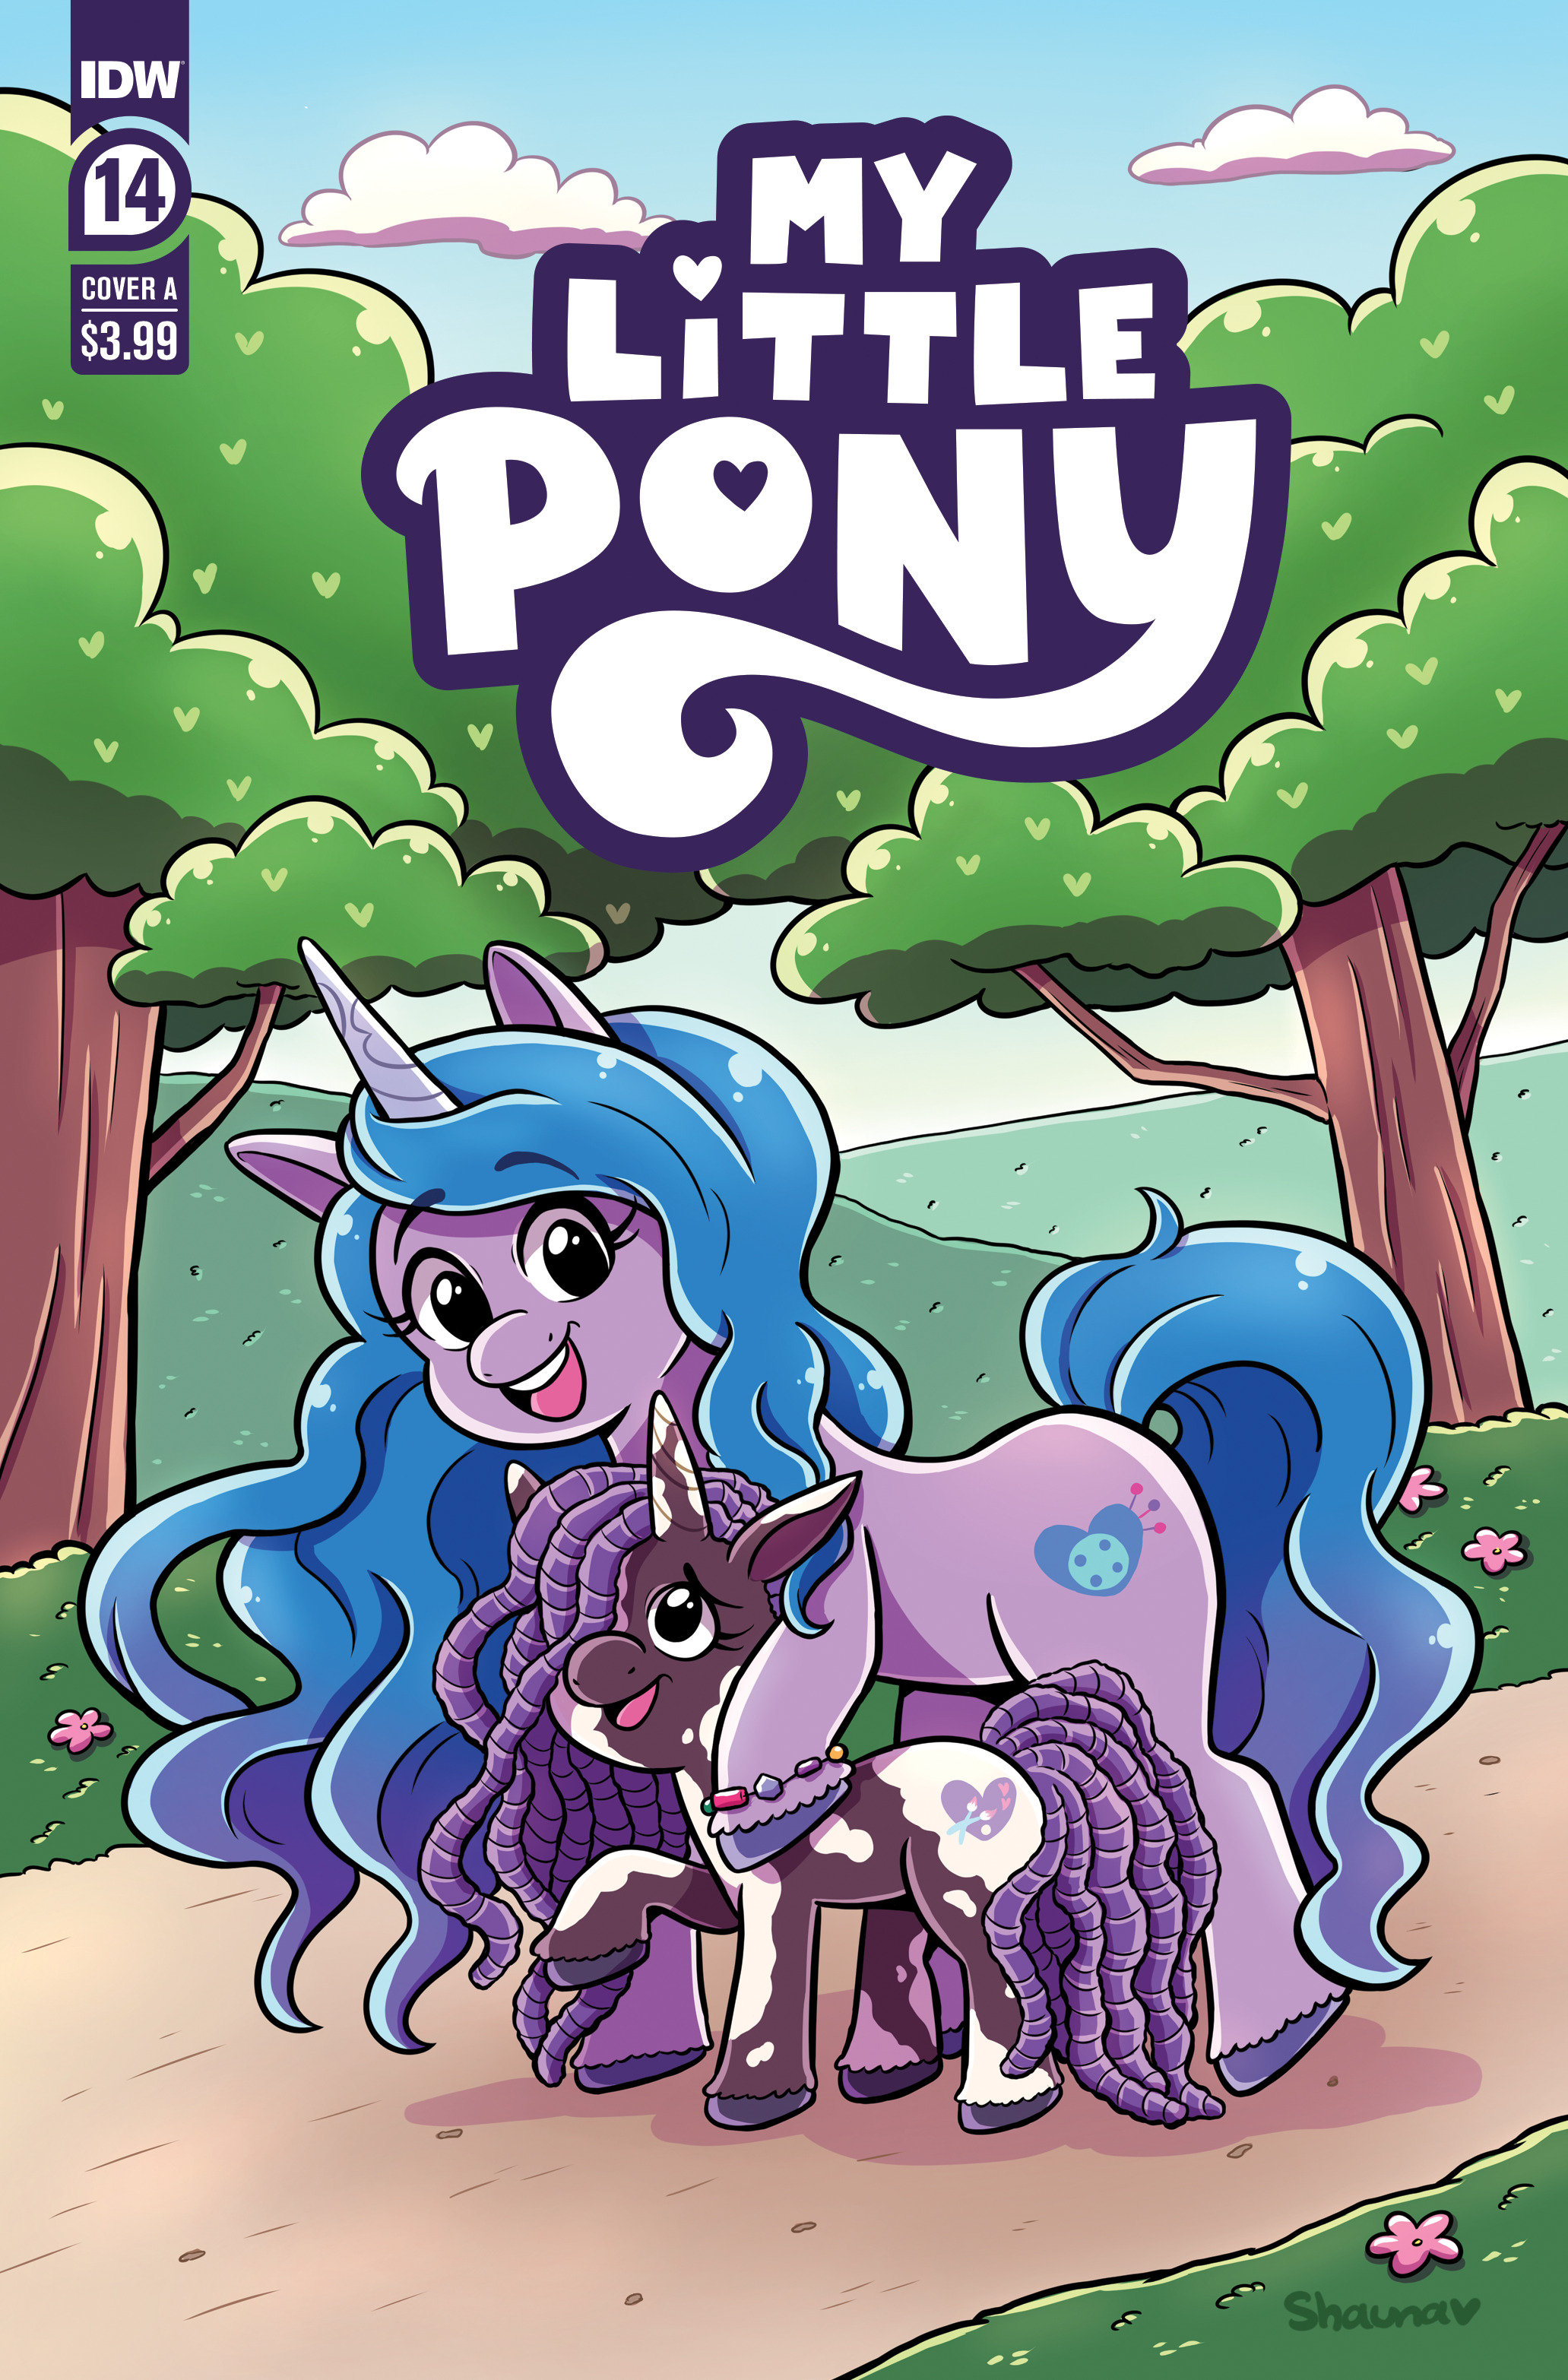 My Little Pony #14 Cover A Grant